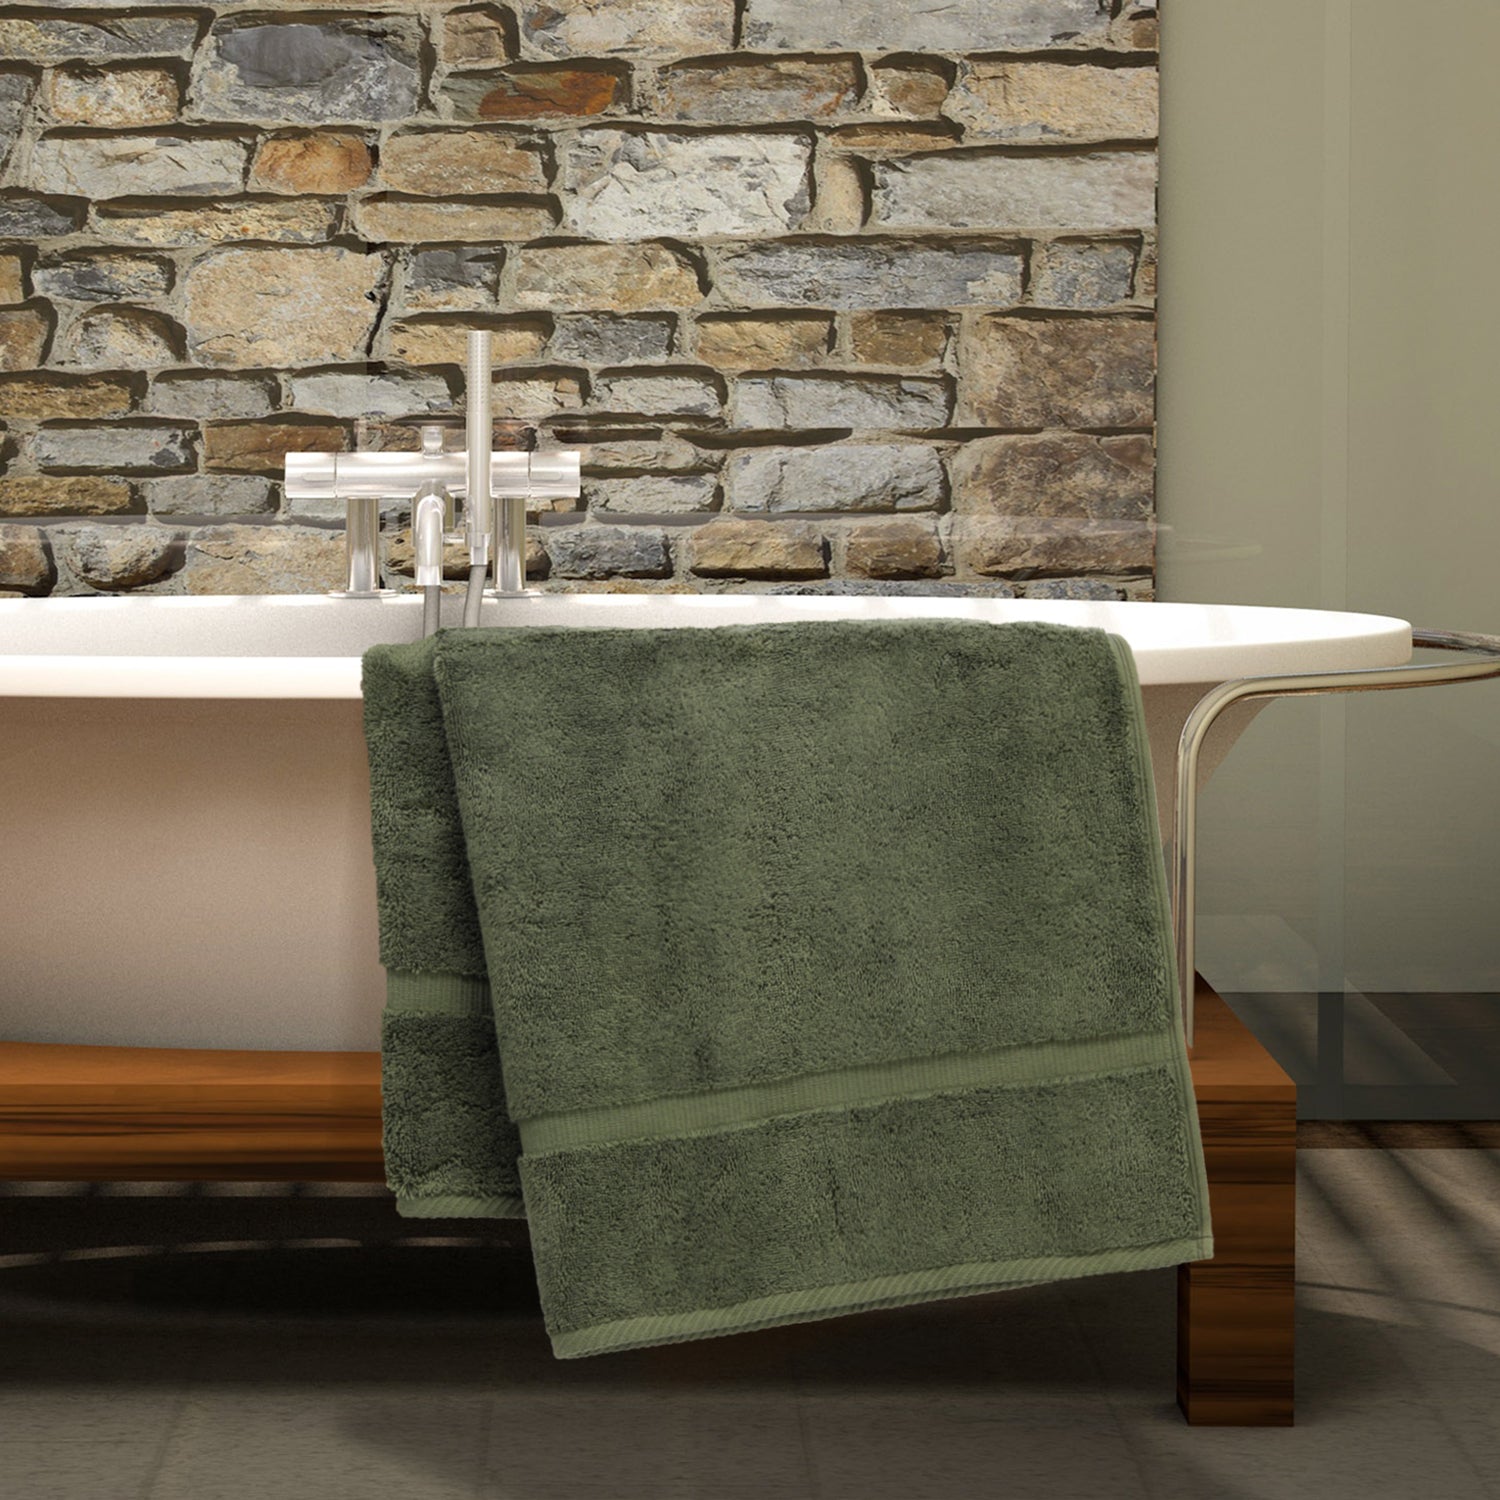 Hanse Hotel Towel 100% Ring Spun Cotton - Double Base Yarn for High Durability - Wonderfully Soft Feel Towel in A Classic Luxury Hotel Style